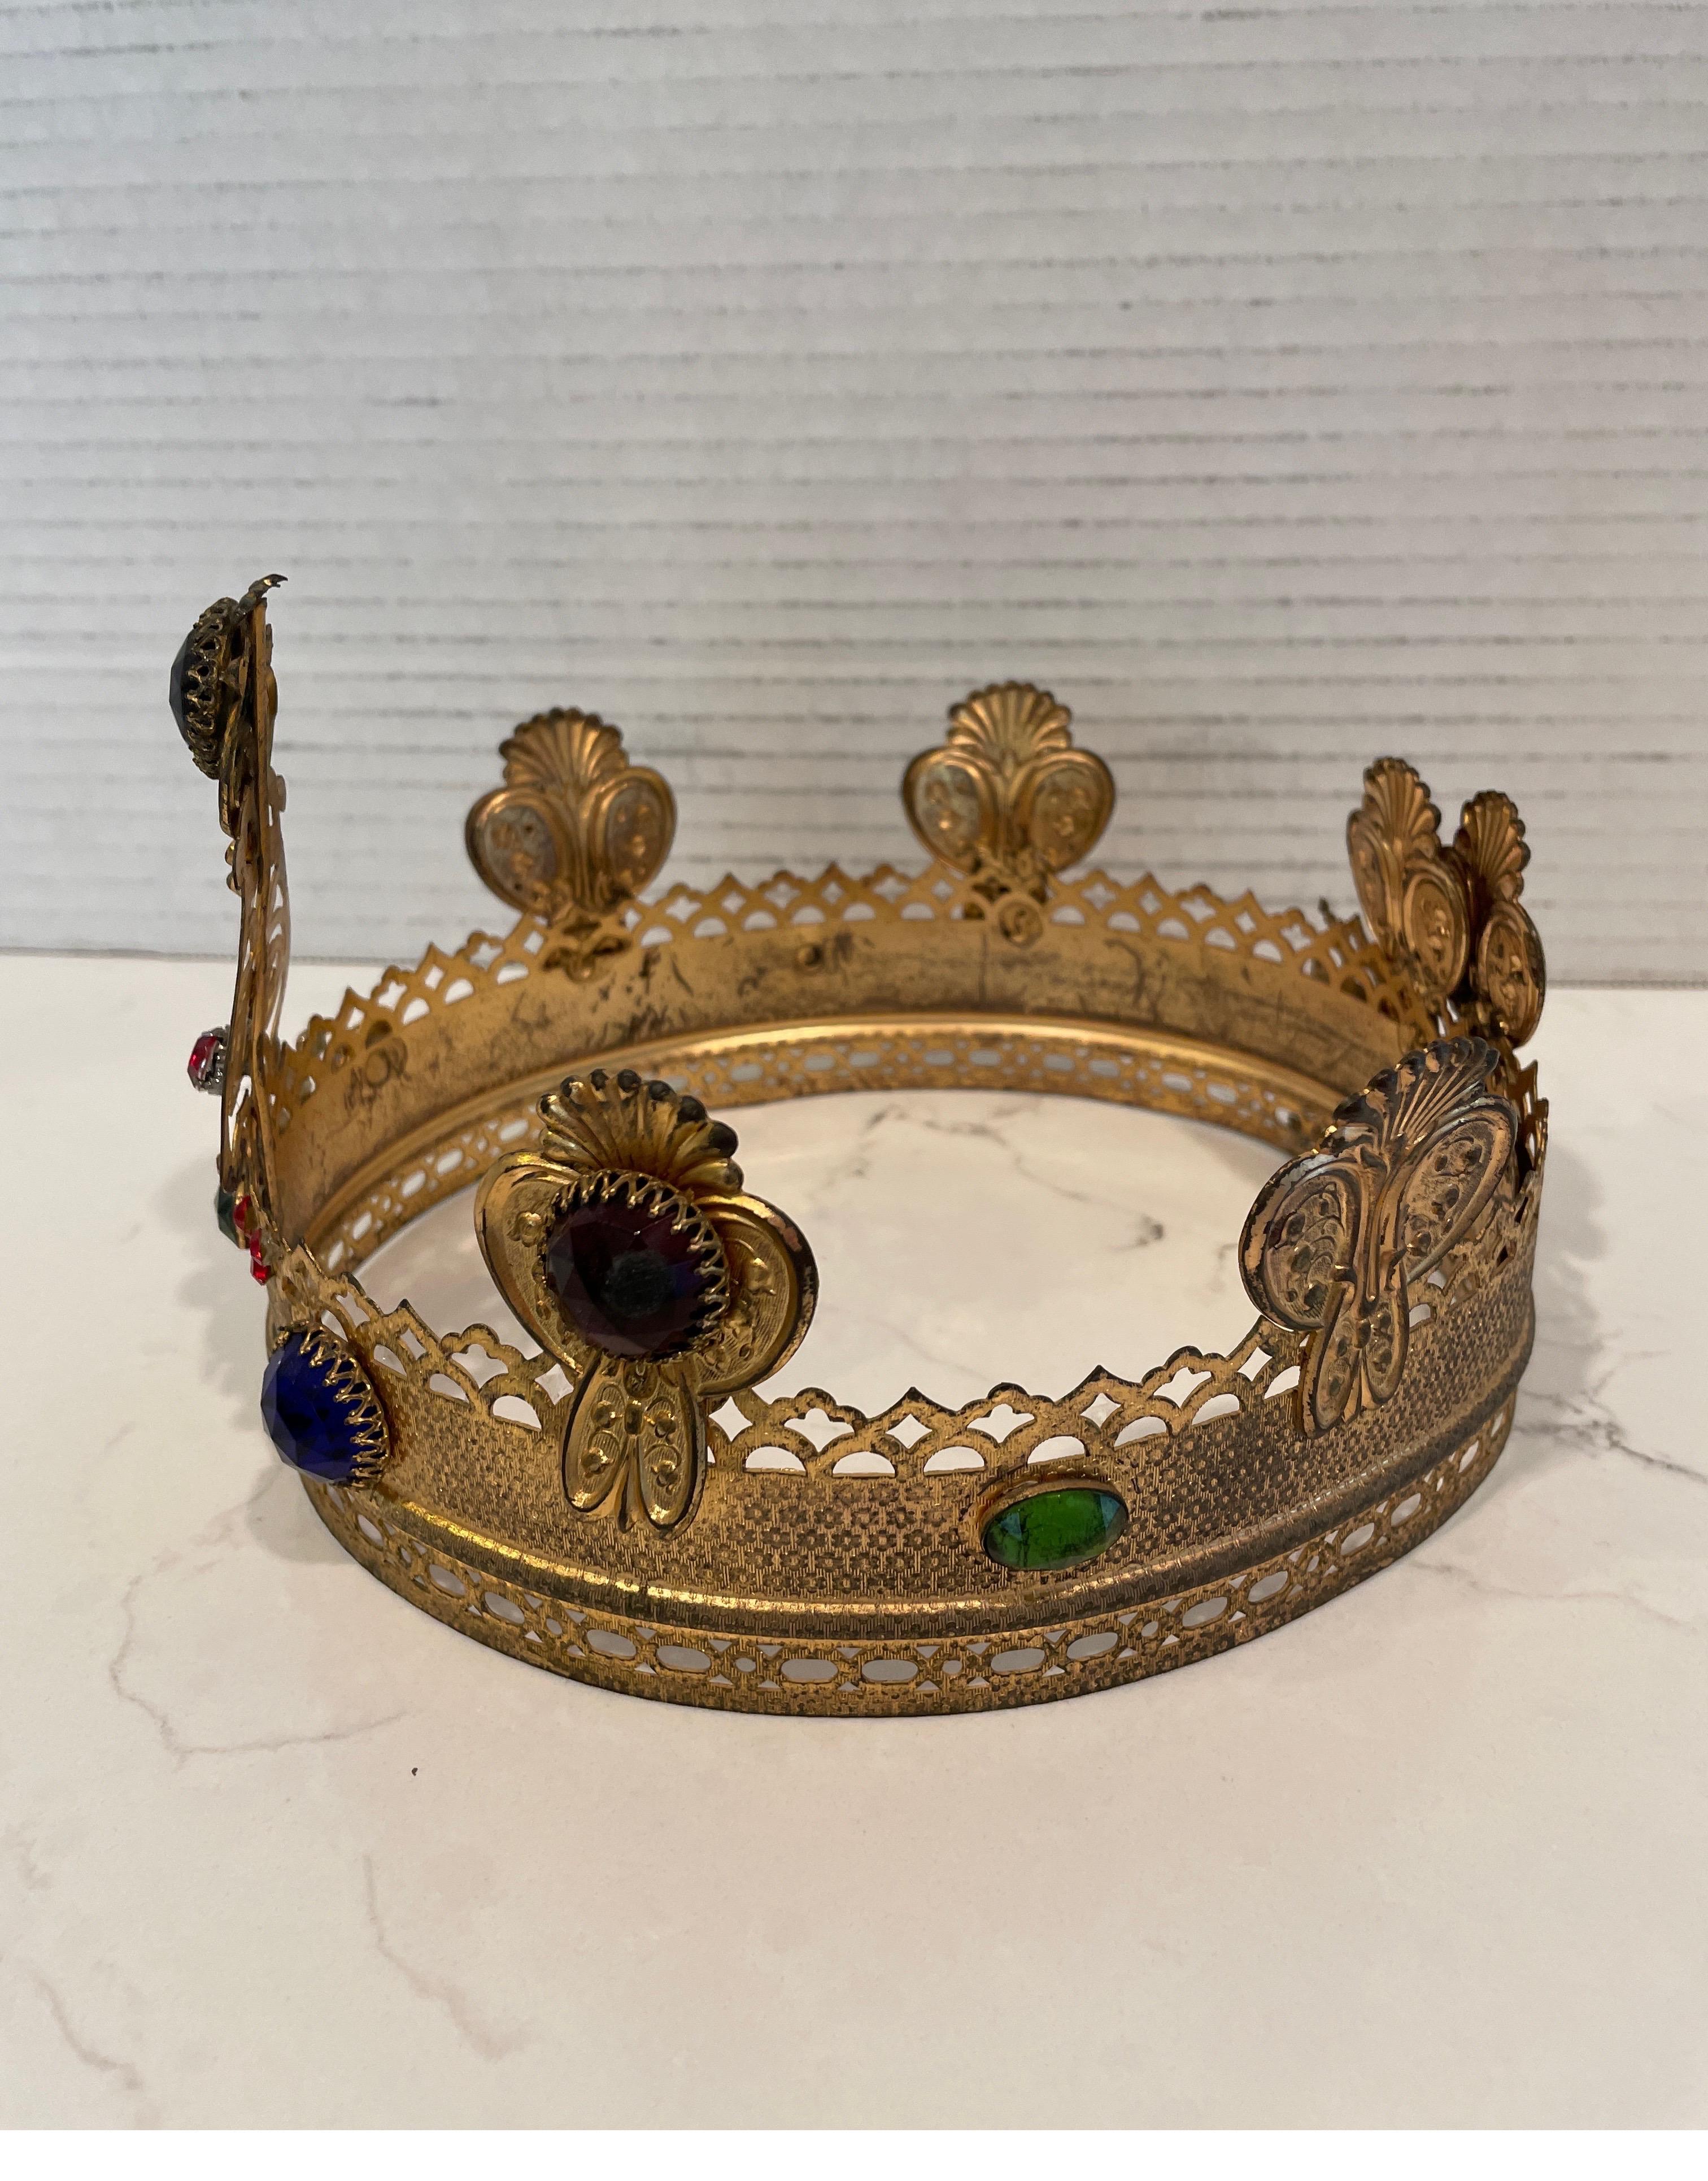 A large filigree religious Santo crown from Prague.